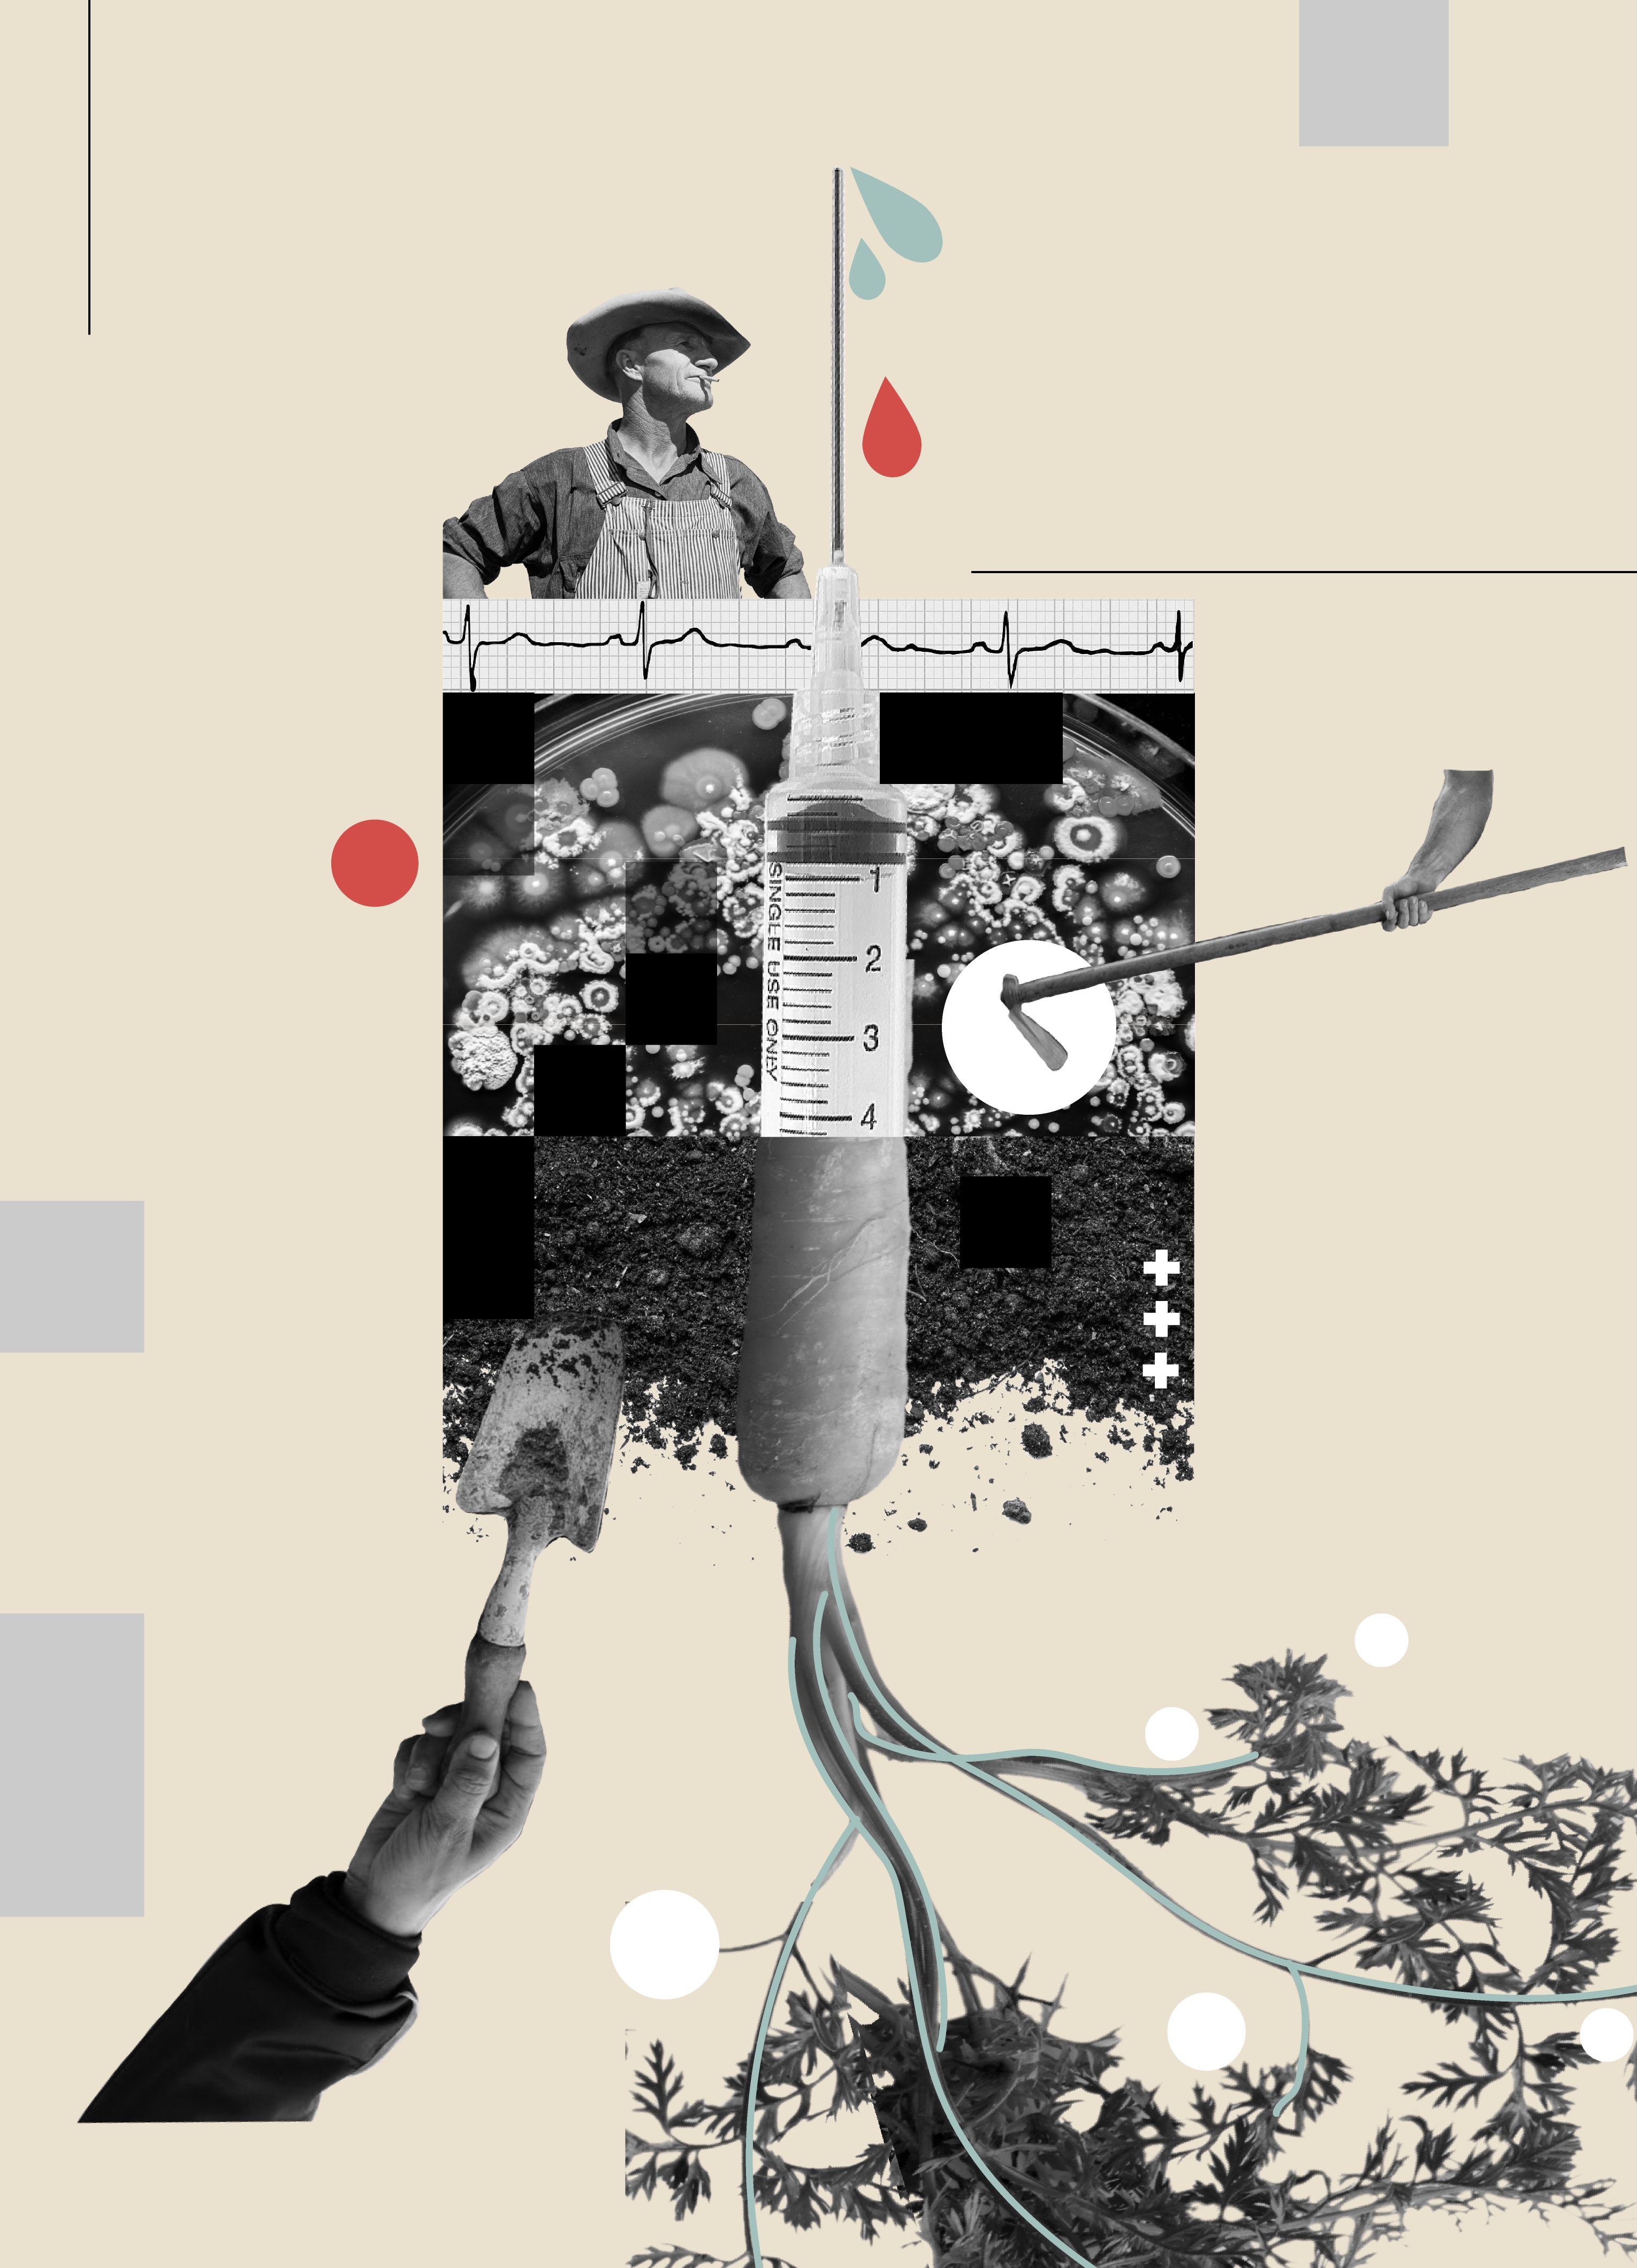 a collage showing farmers with a syringe and carrot against a tan background